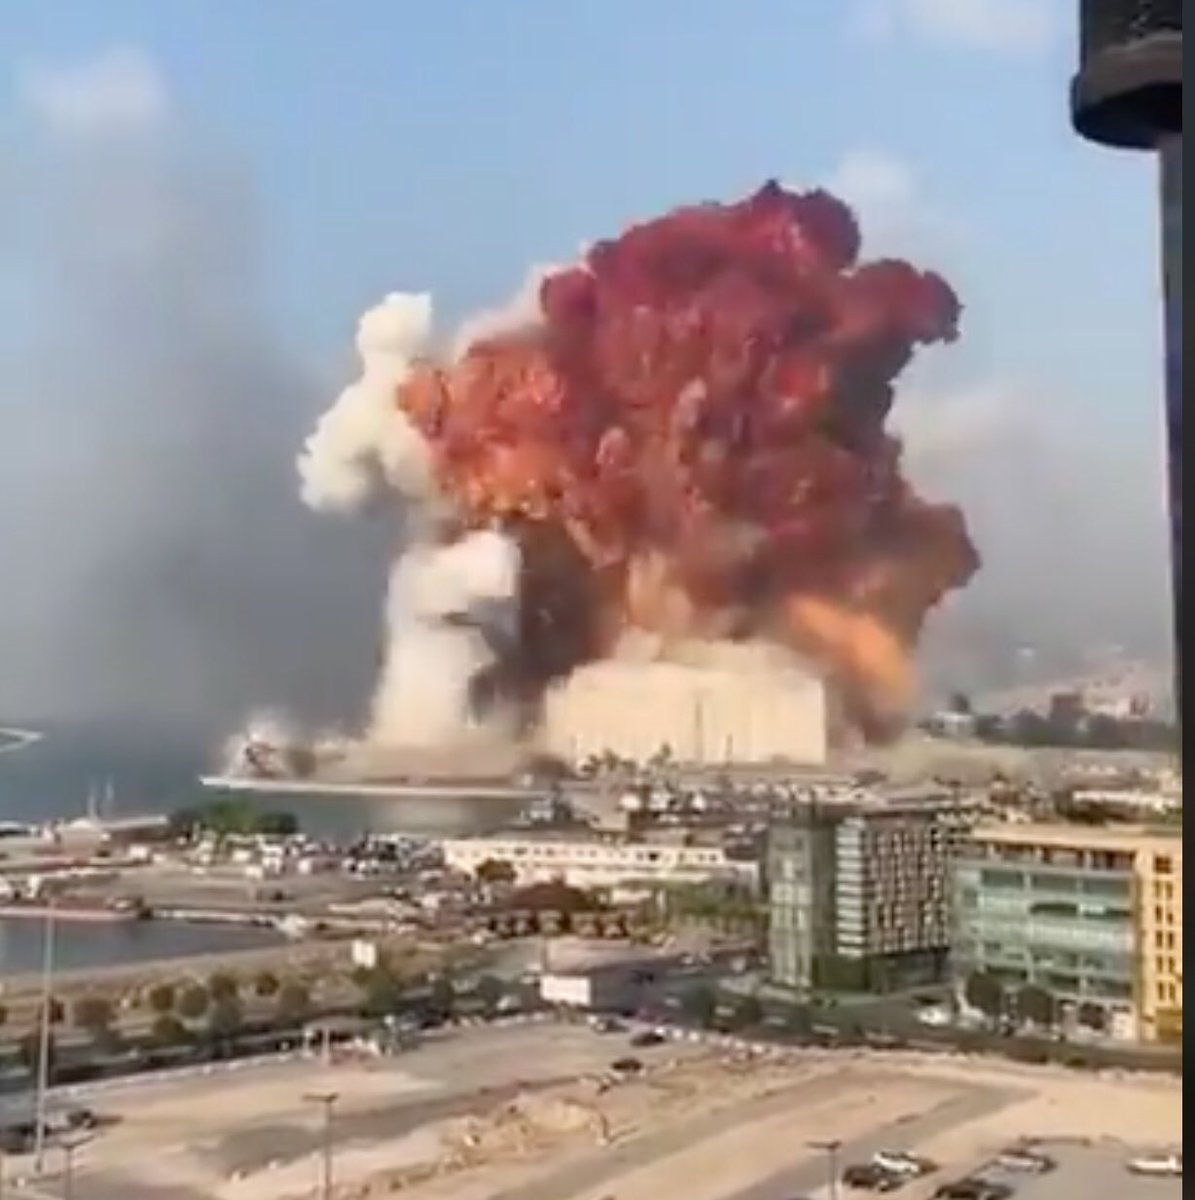 the explosion is clearly next to the water, while the fireworks factory is not, so probably notso what’s the building in front of it?